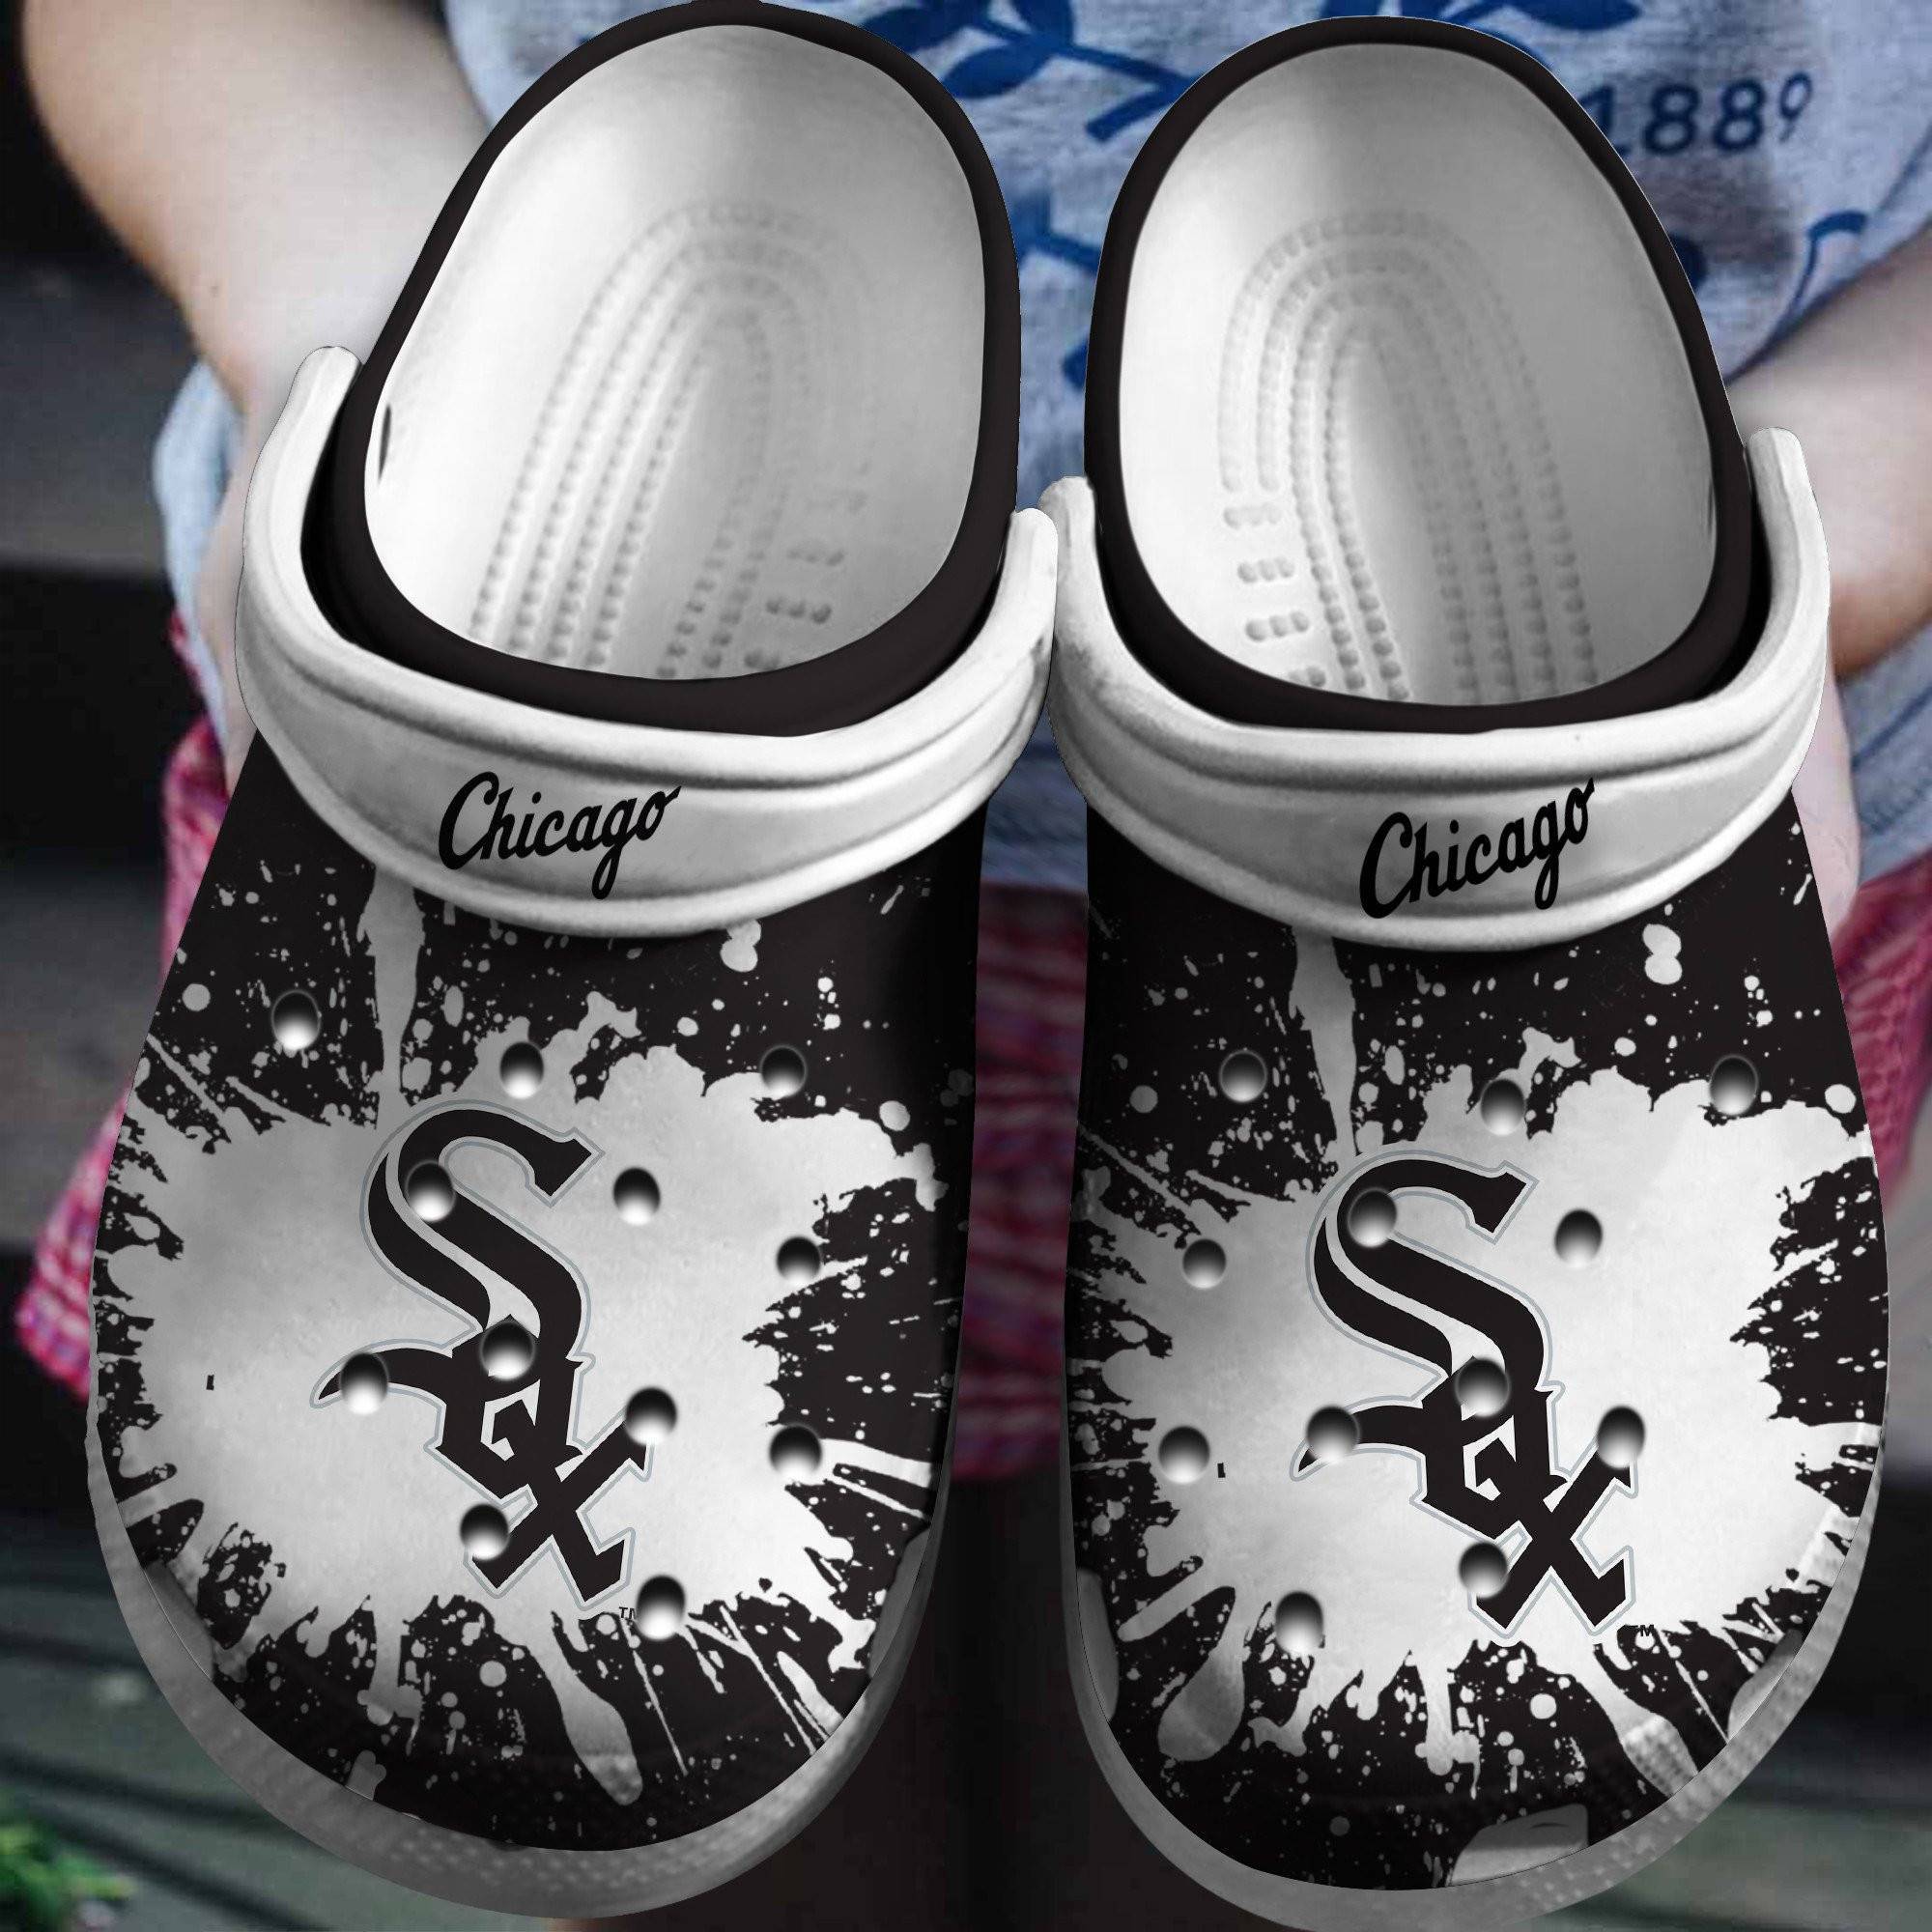 Hot Mlb Team Chicago White Sox White – Black Crocss Clog Shoesshoes Trusted Shopping Online In The World